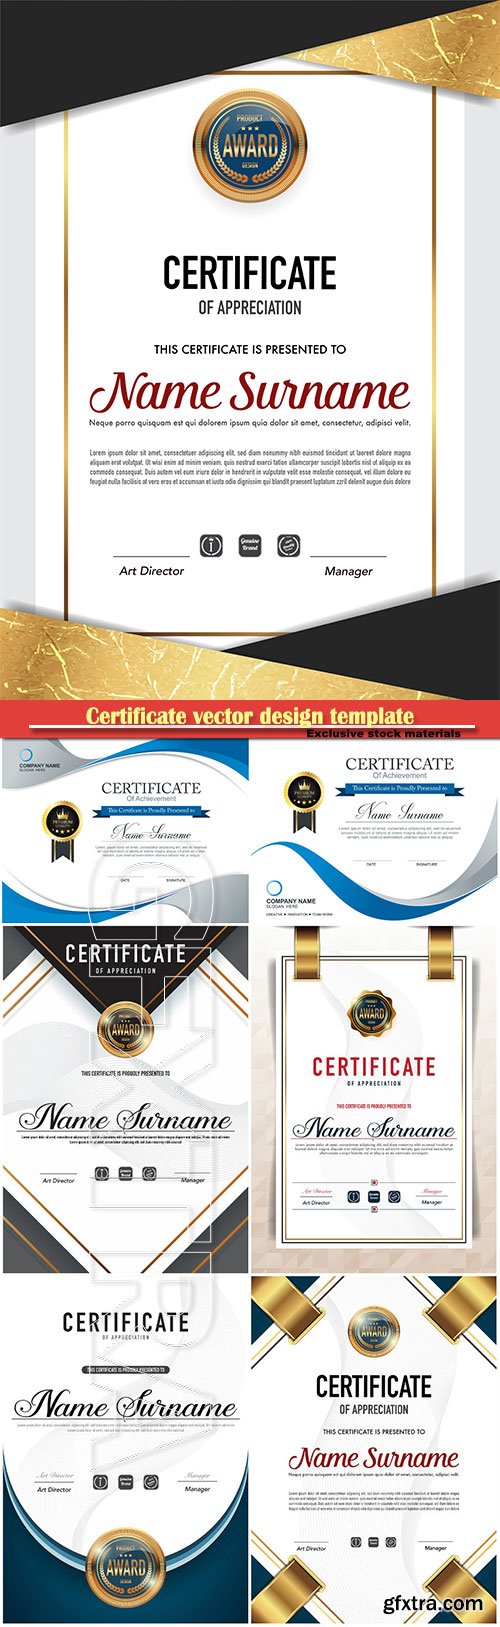 Certificate and vector diploma design template # 75